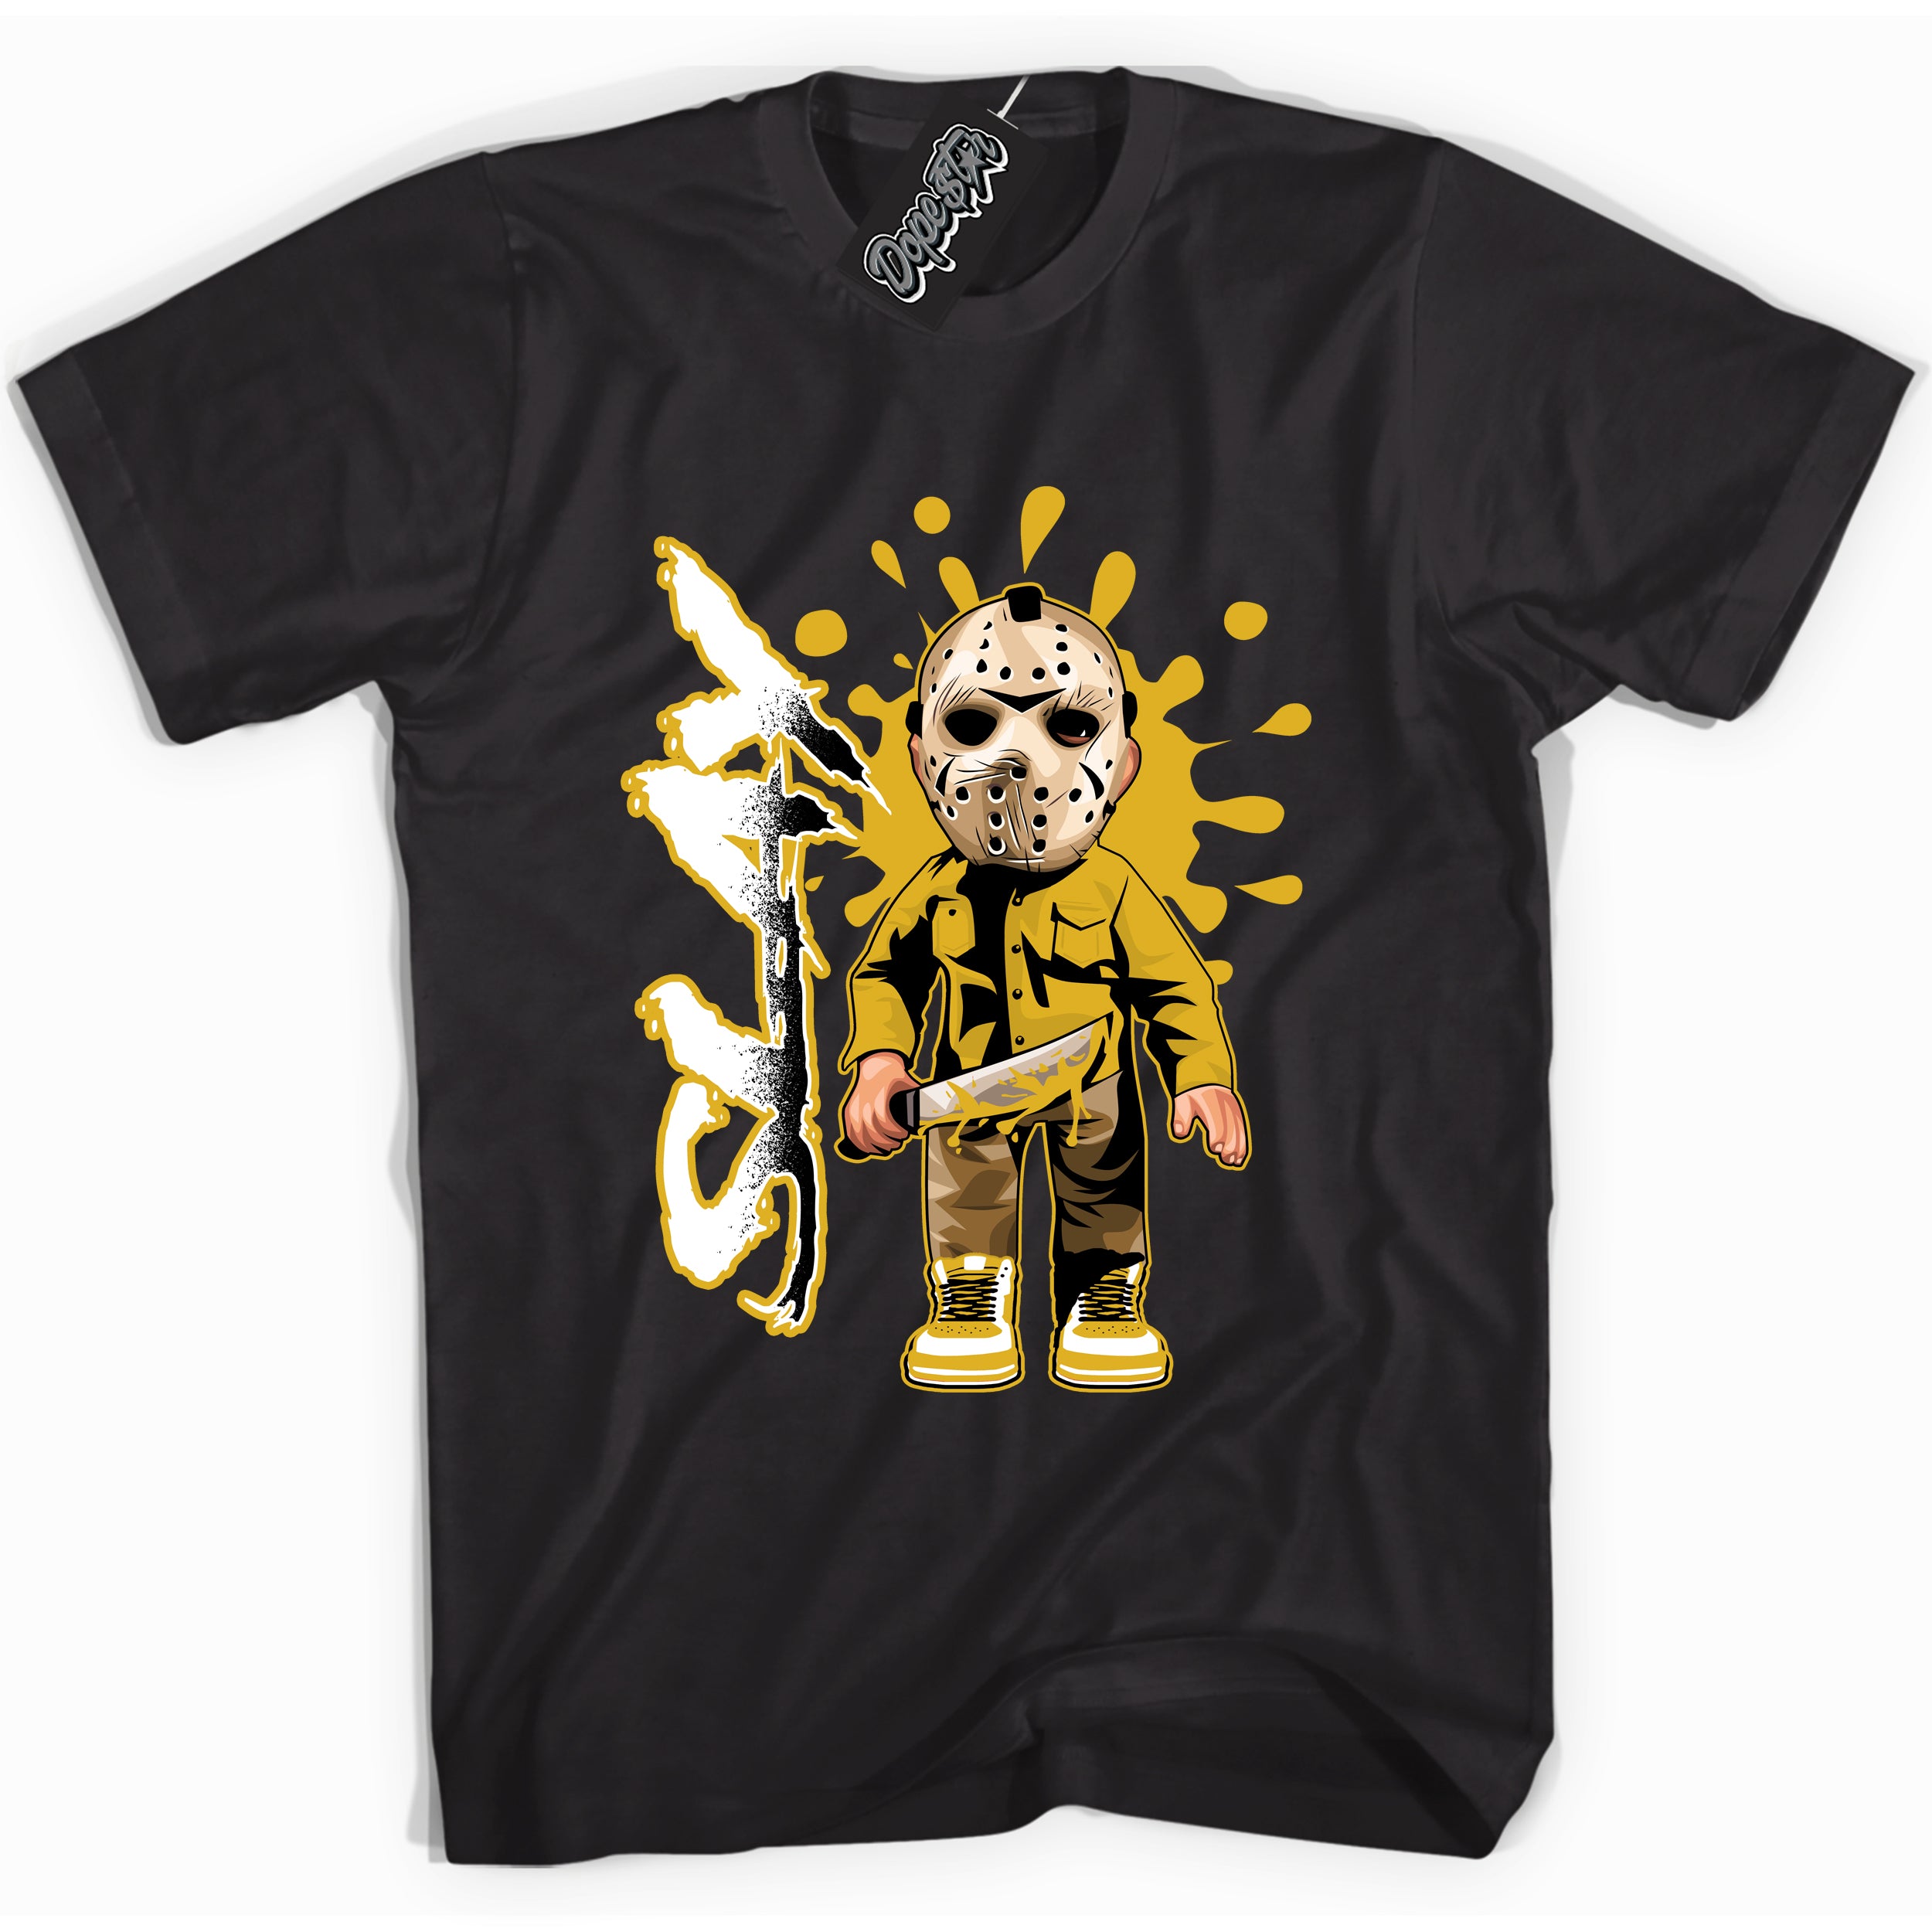 Cool Black Shirt with “ Slay” design that perfectly matches Yellow Ochre 6s Sneakers.